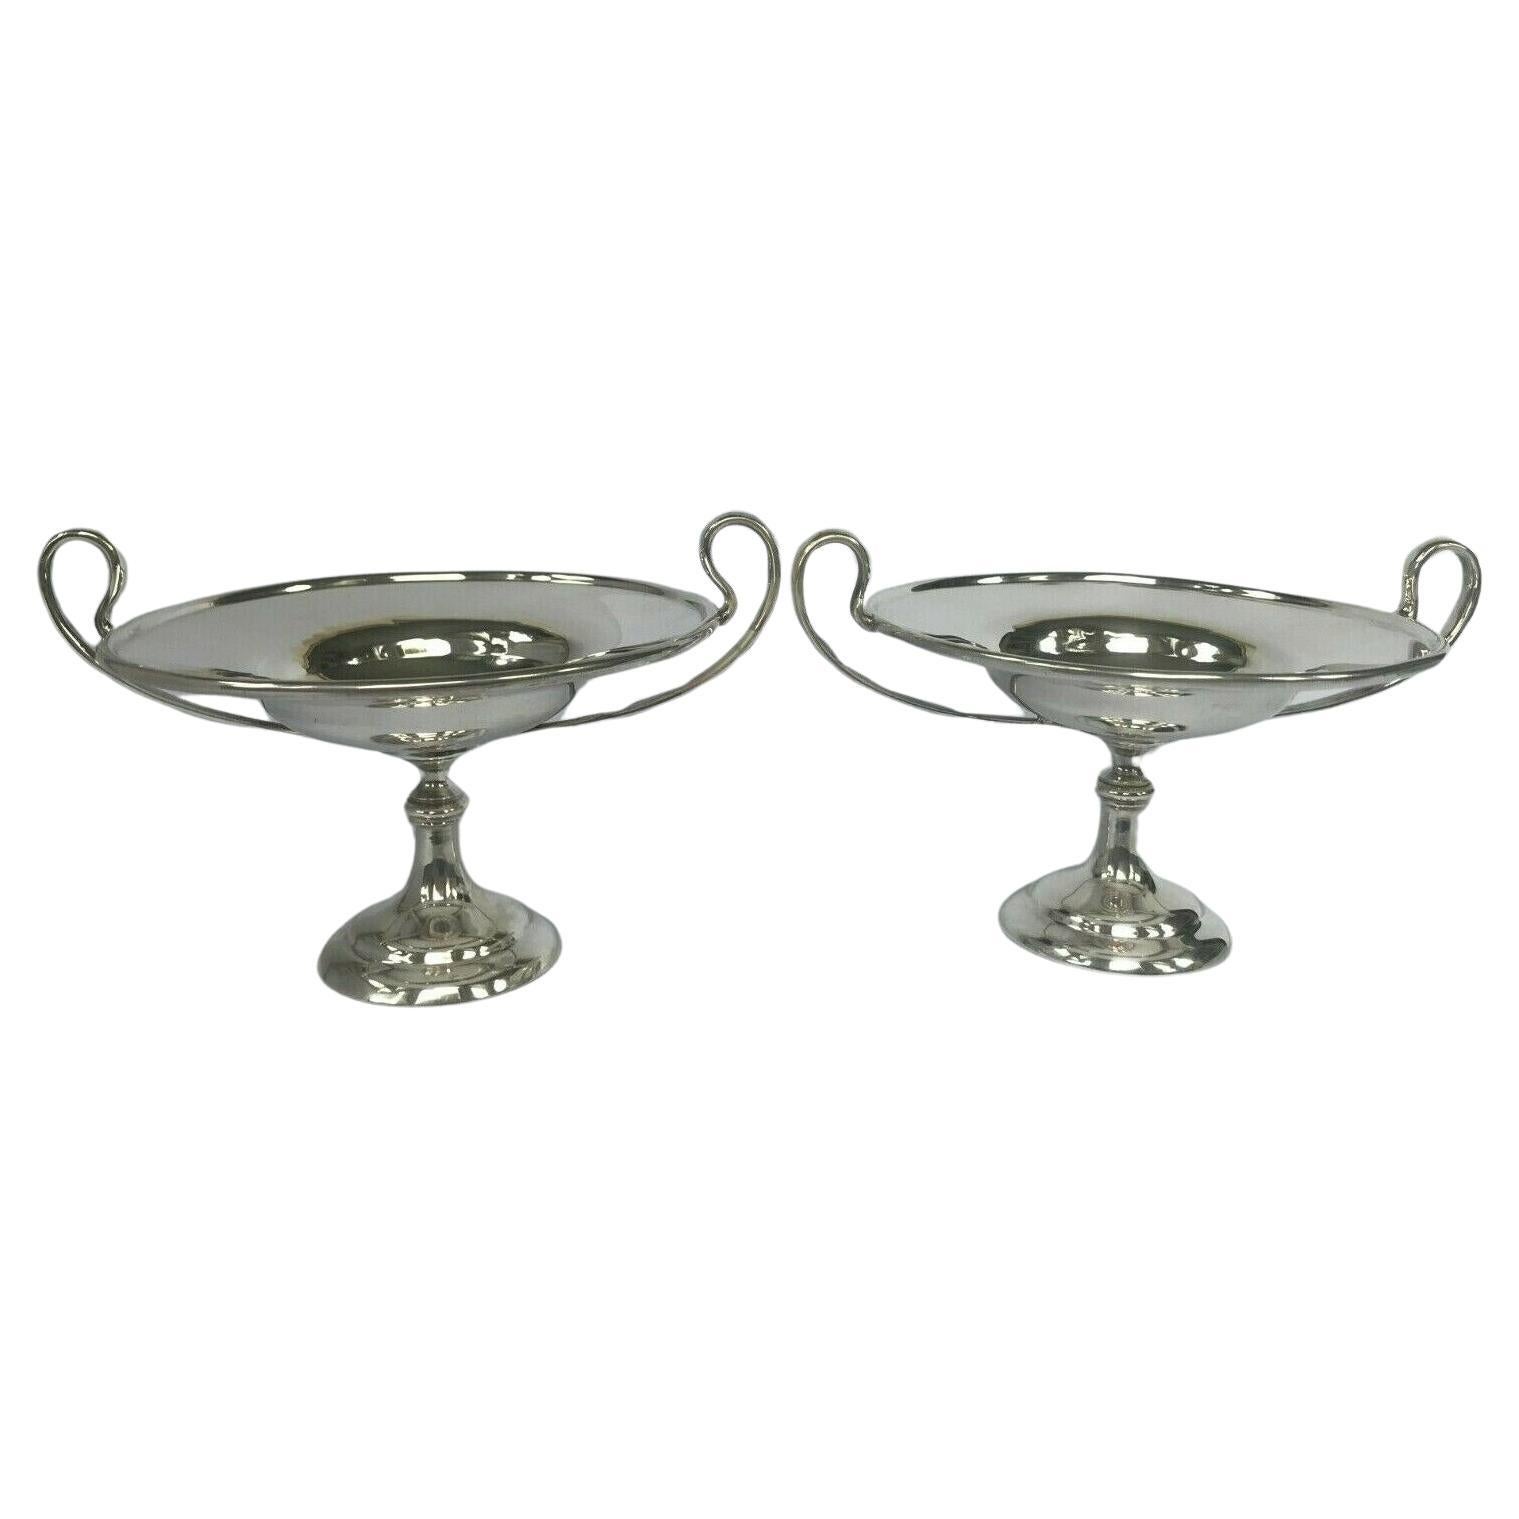 Pair of Sterling Silver Bonbon Dishes by Holland, Aldwinckle & Slater, 1903